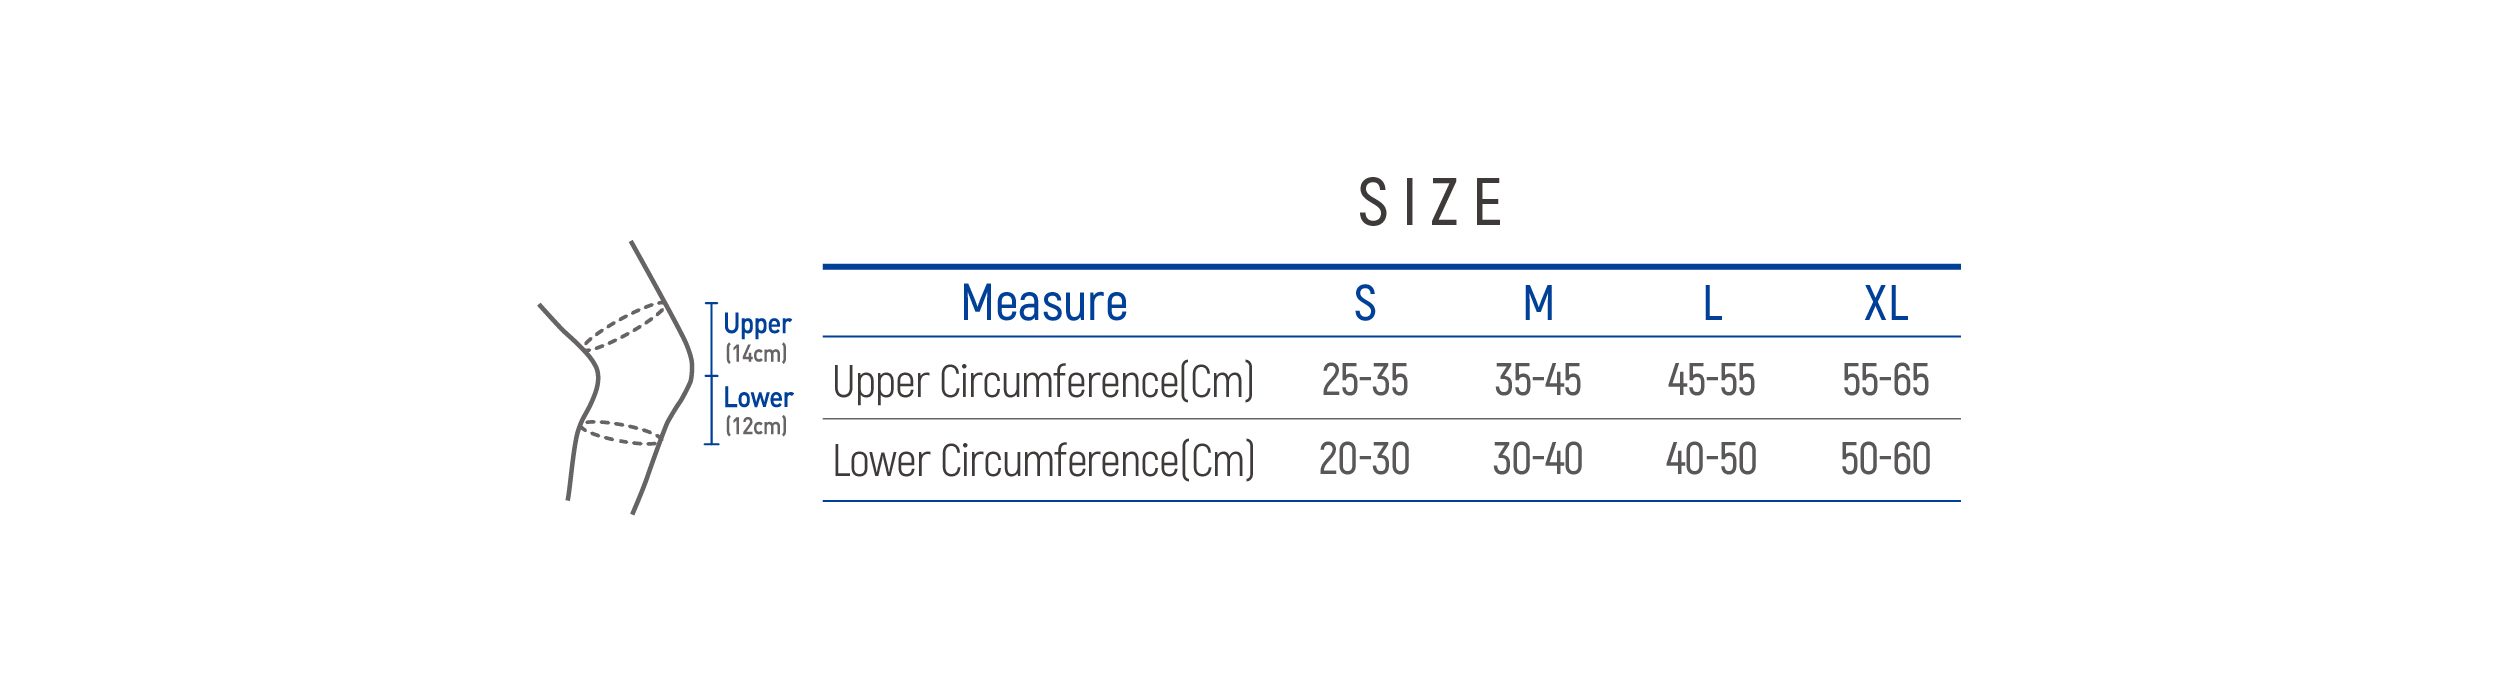 DR-K025 Size table image